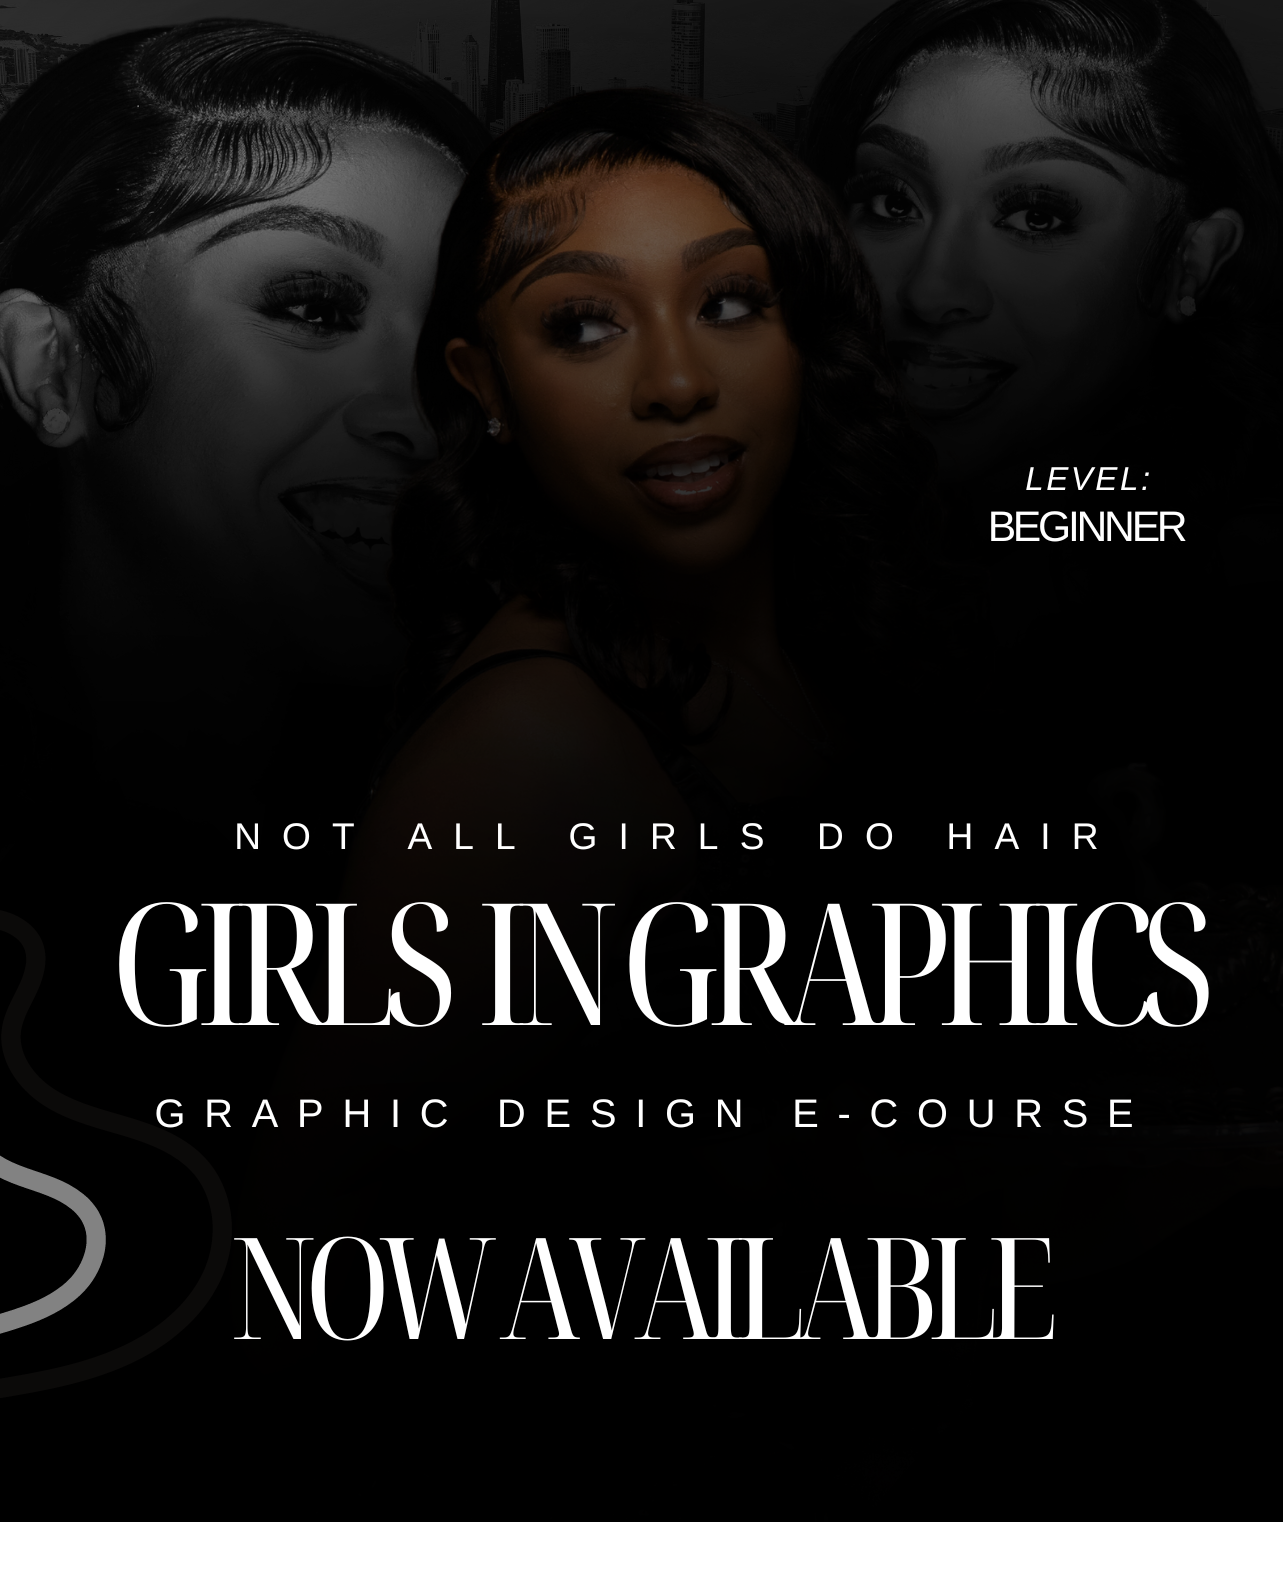 GIRLS IN GRAPHICS REPLAYABLE E-COURSE